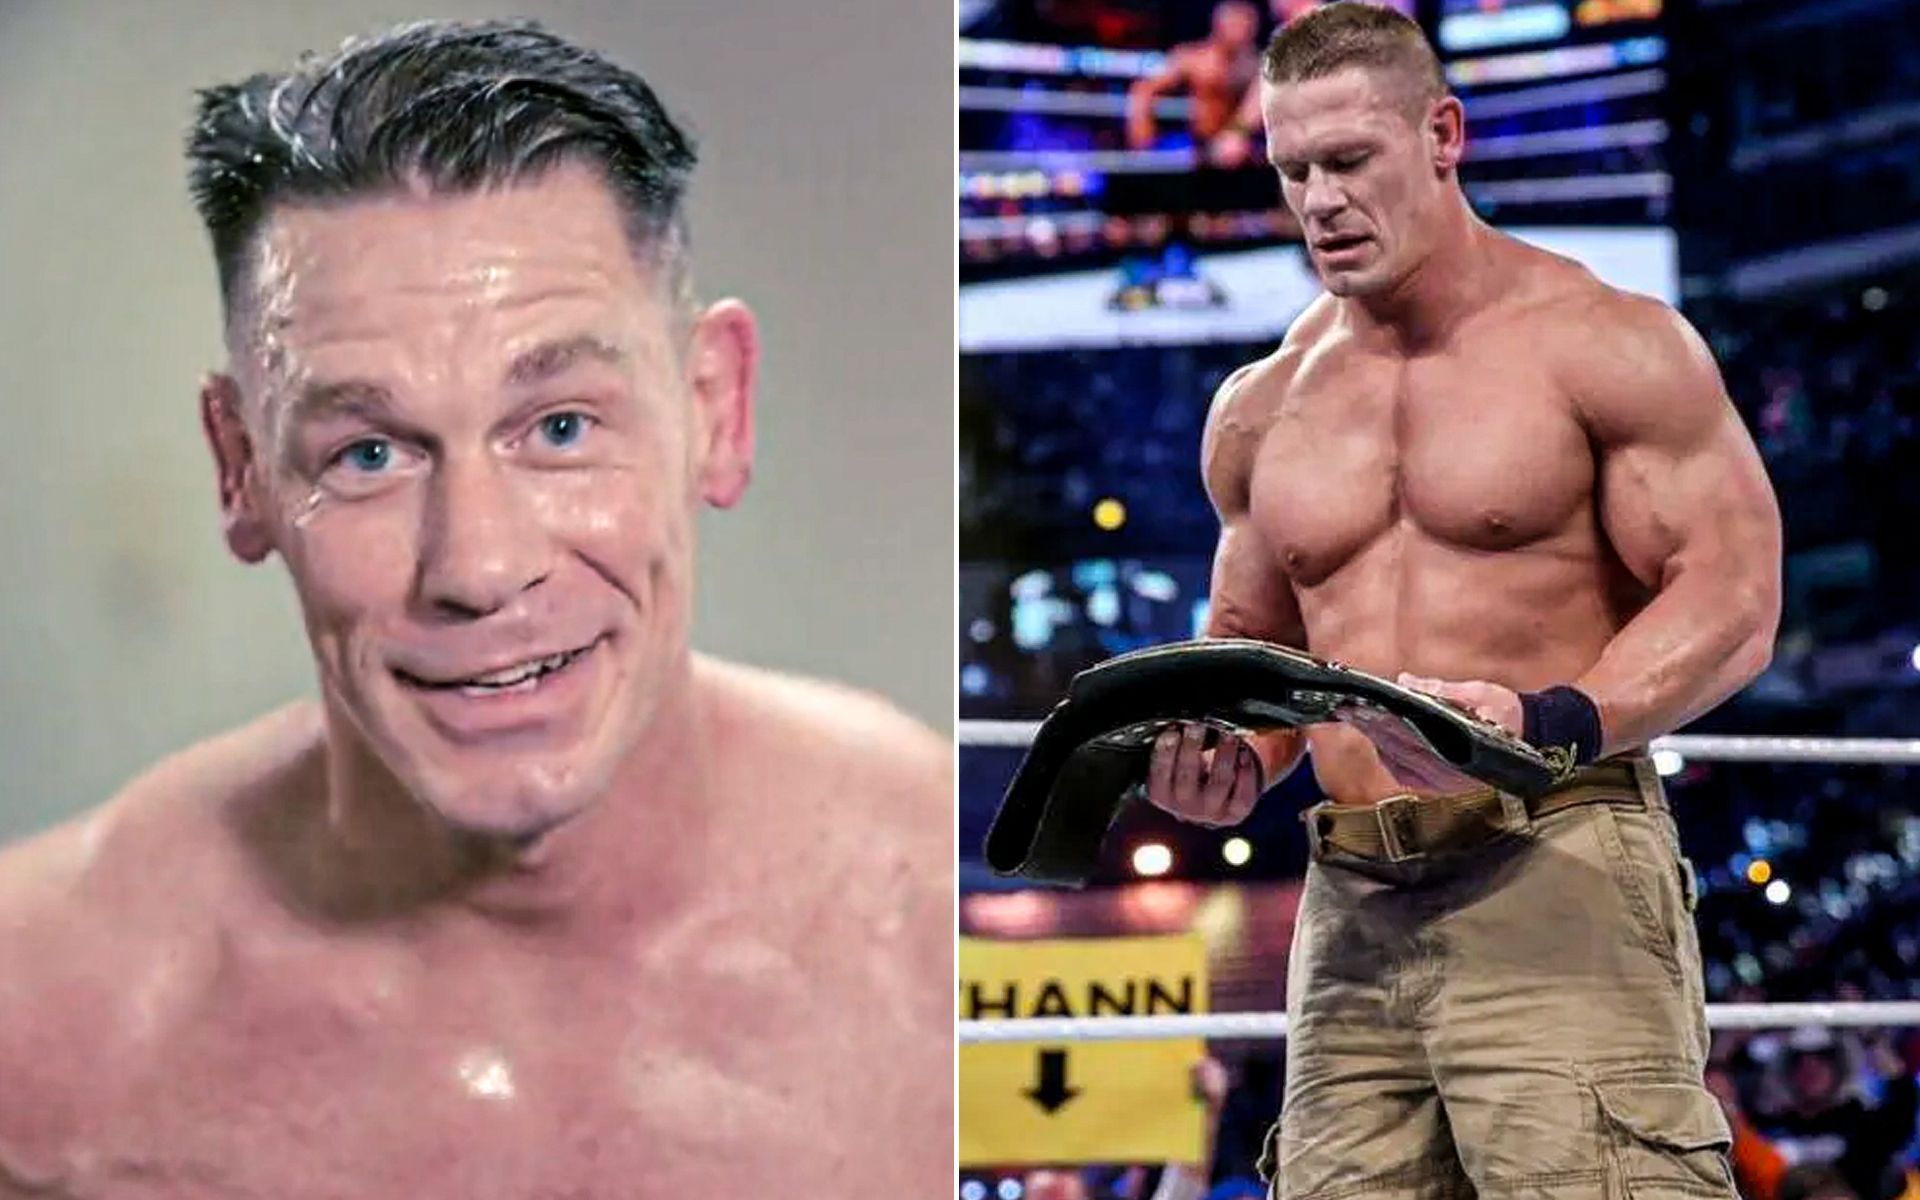 John Cena is currently the 16x World Champion in WWE